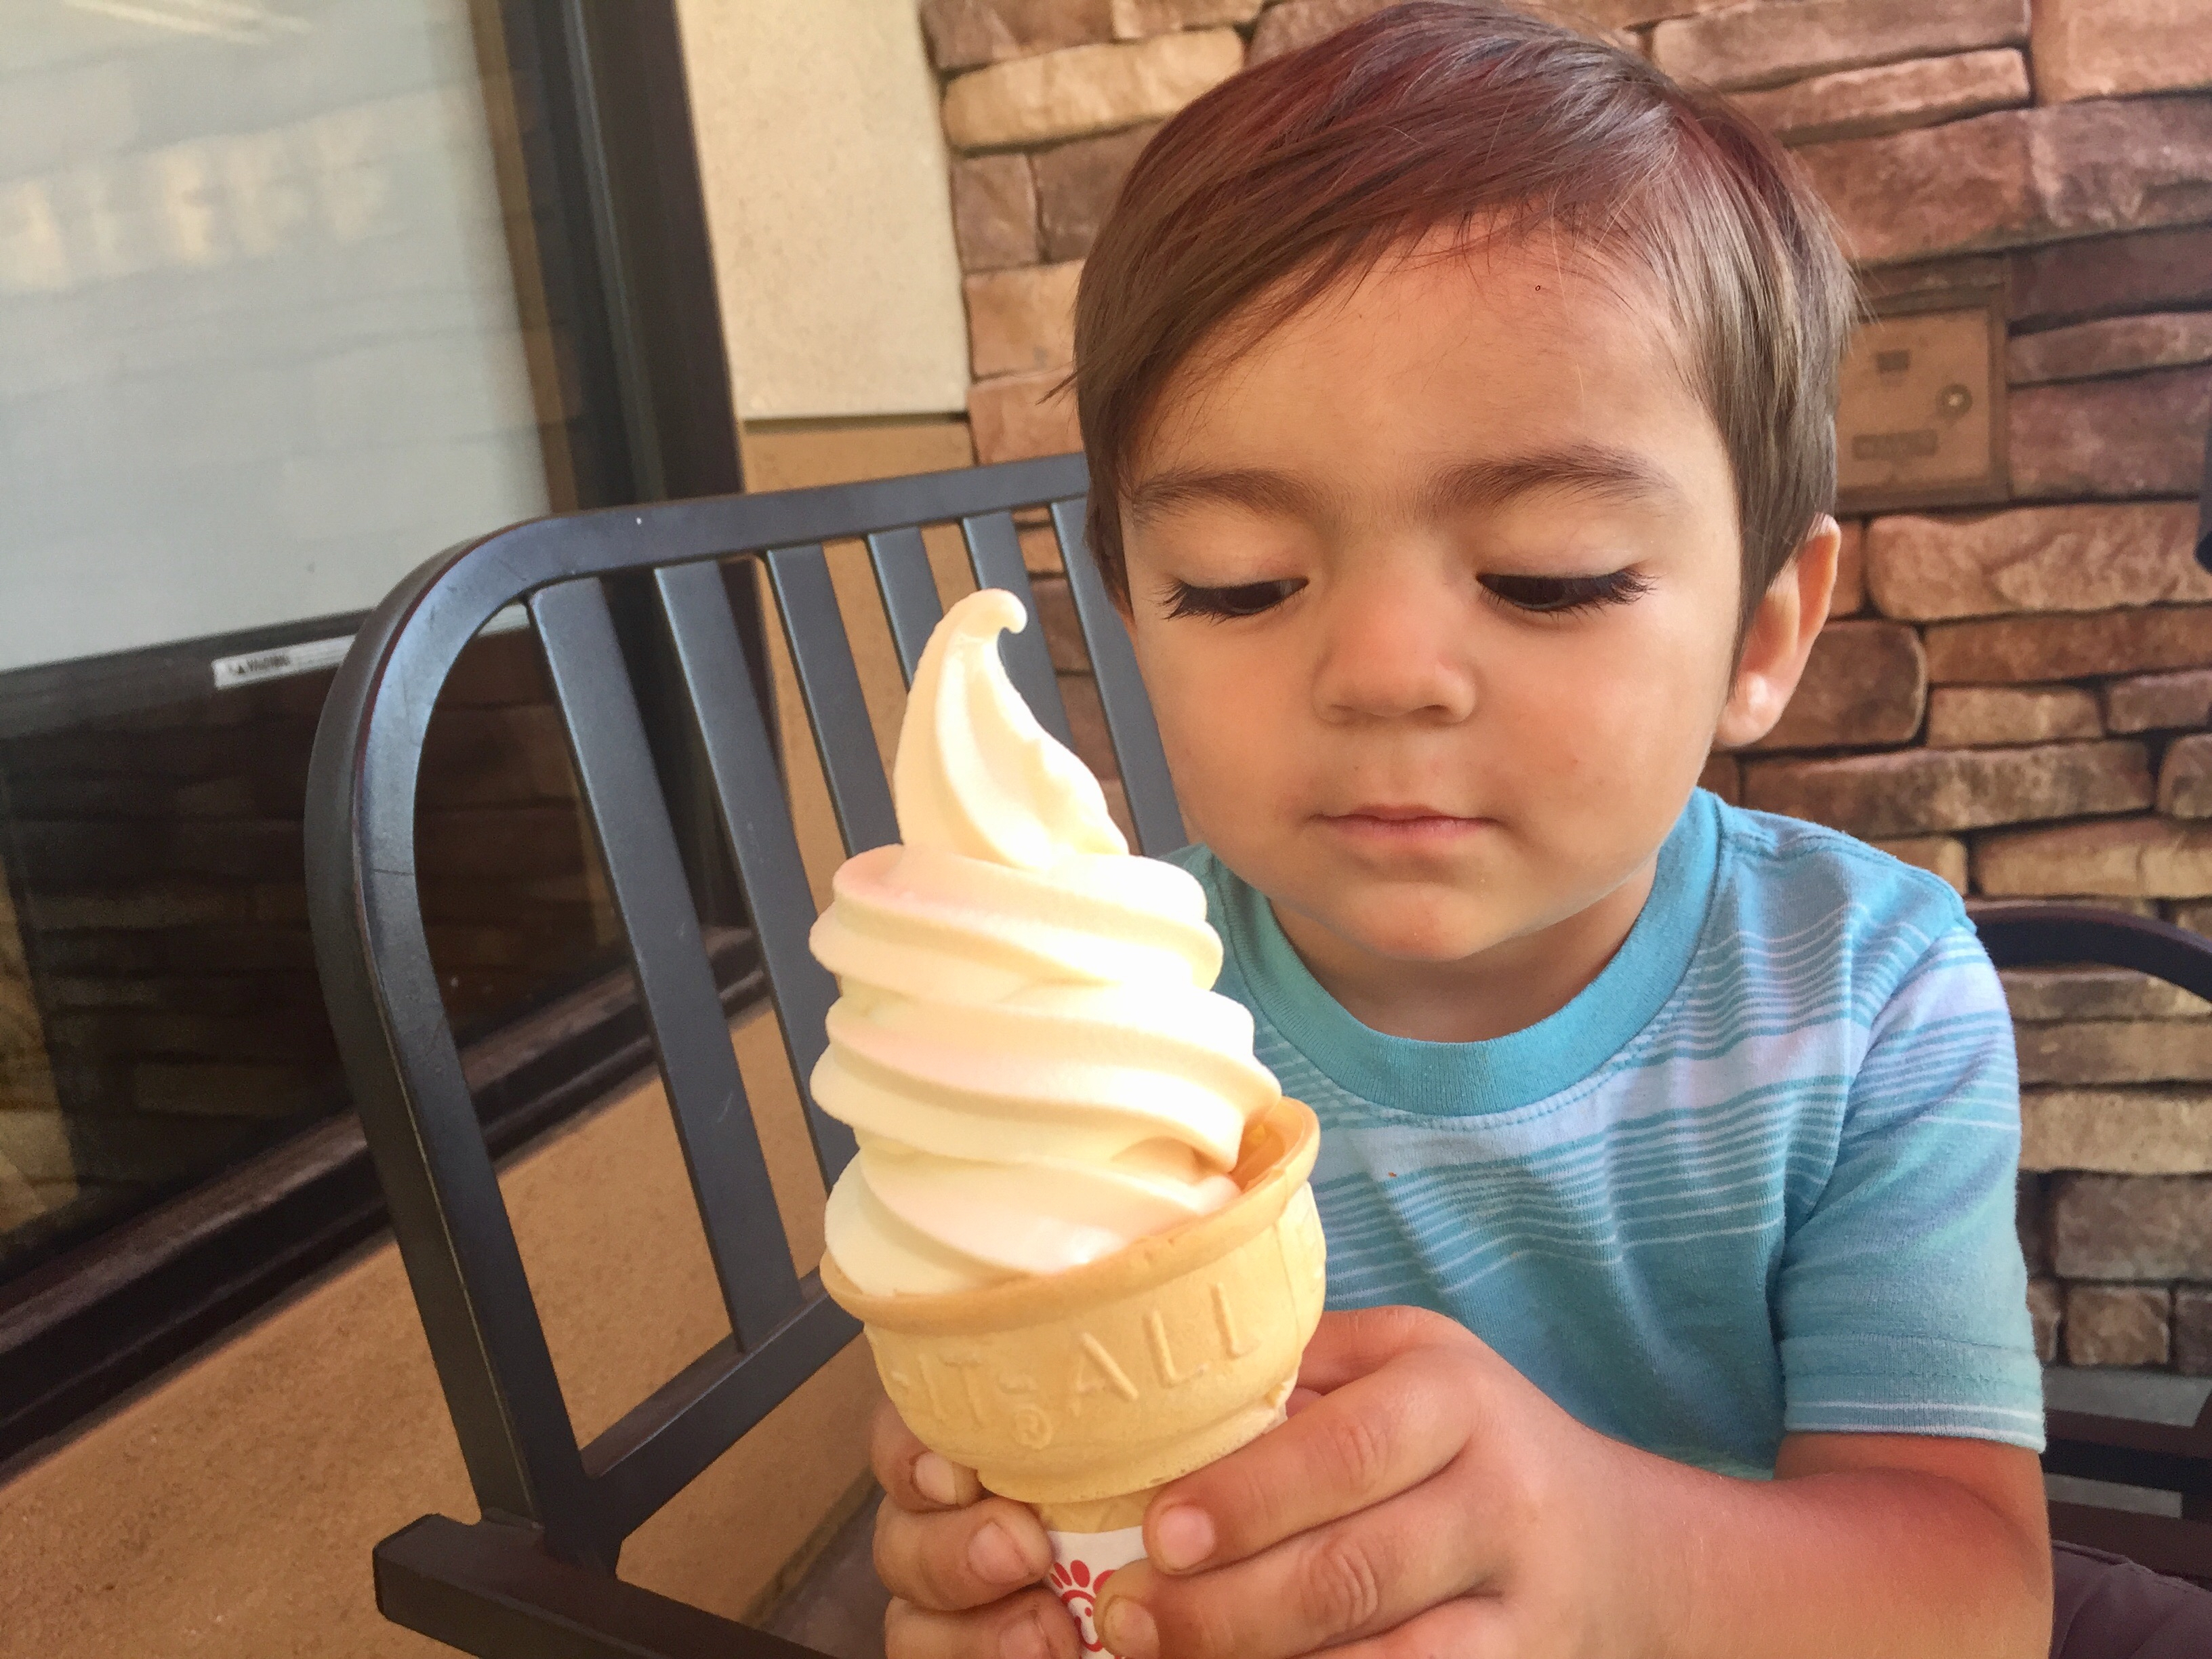 Get Chick-fil-A free nuggets through the app - Get Chick-fil-A One member rewards like this ice cream cone